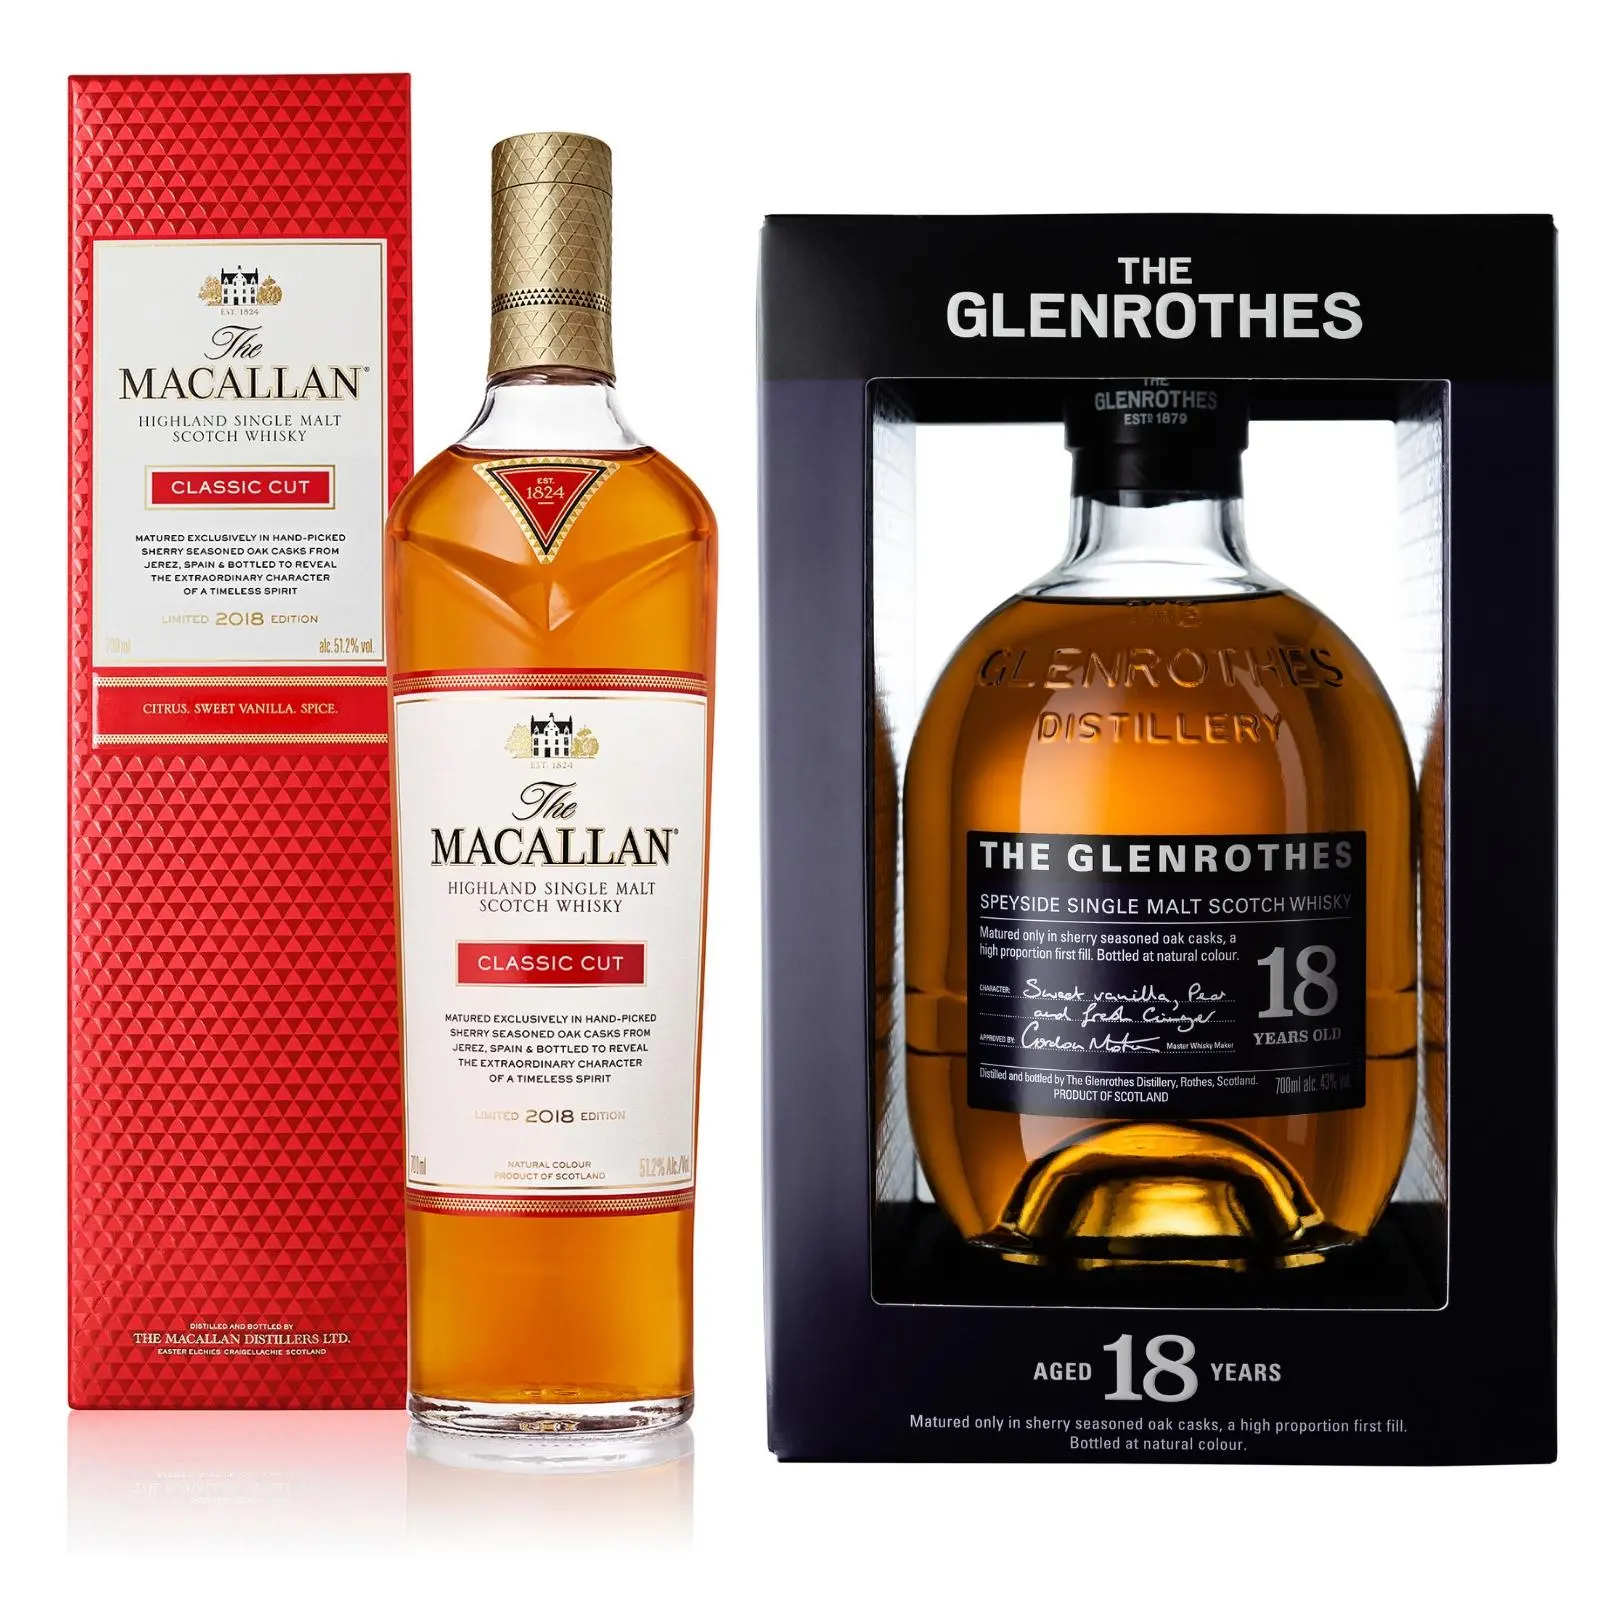 The Macallan Classic Cut 2018 Edition 700ml The Glenrothes Soleo 18 Year Old 700ml Whisky Lazada Singapore